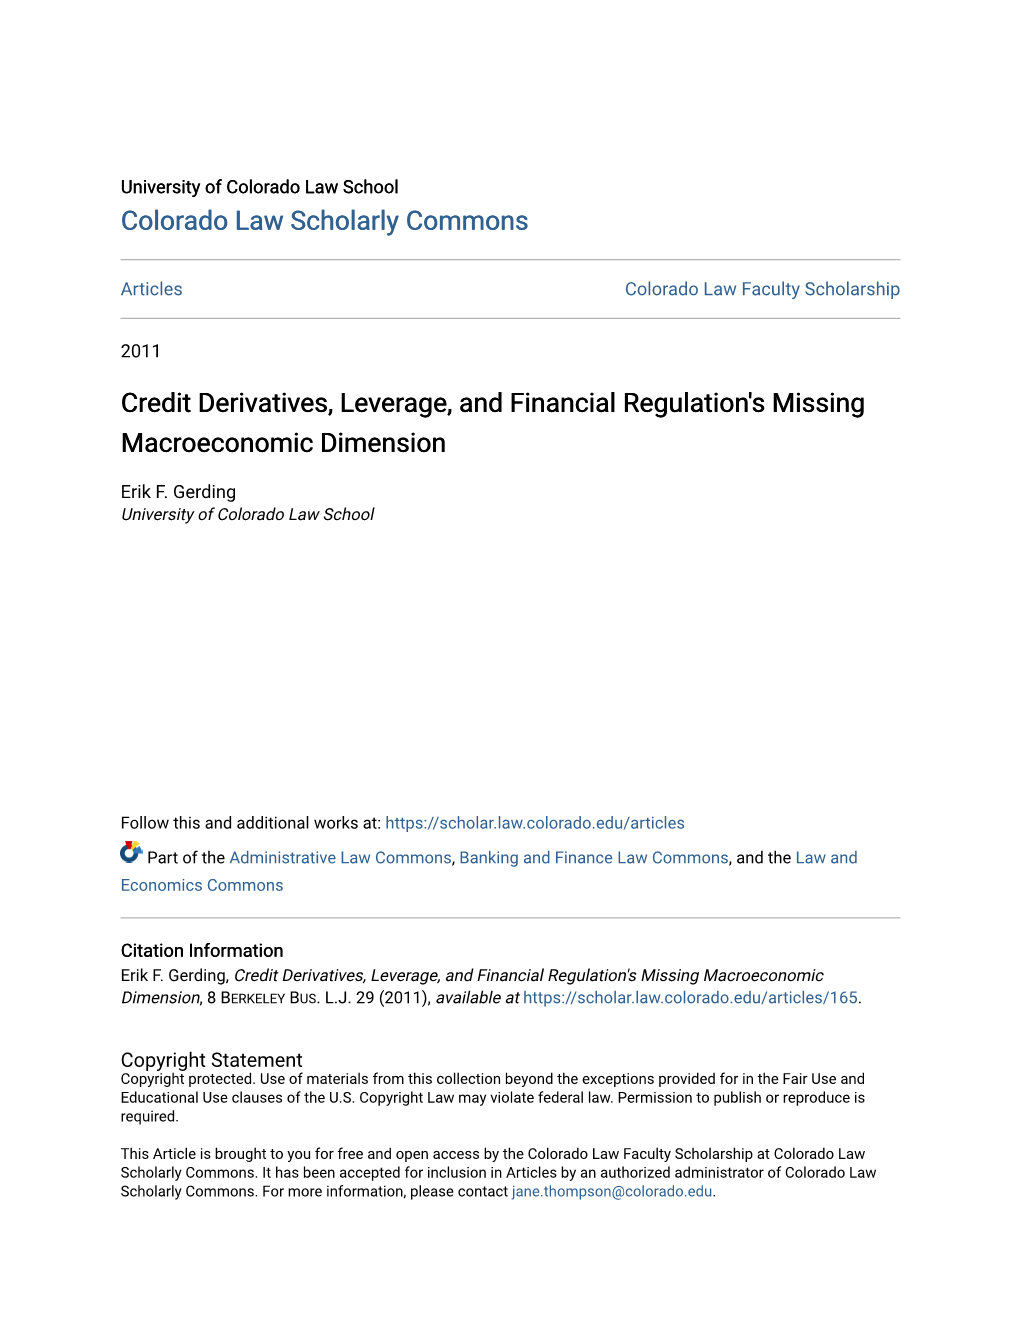 Credit Derivatives, Leverage, and Financial Regulation's Missing Macroeconomic Dimension